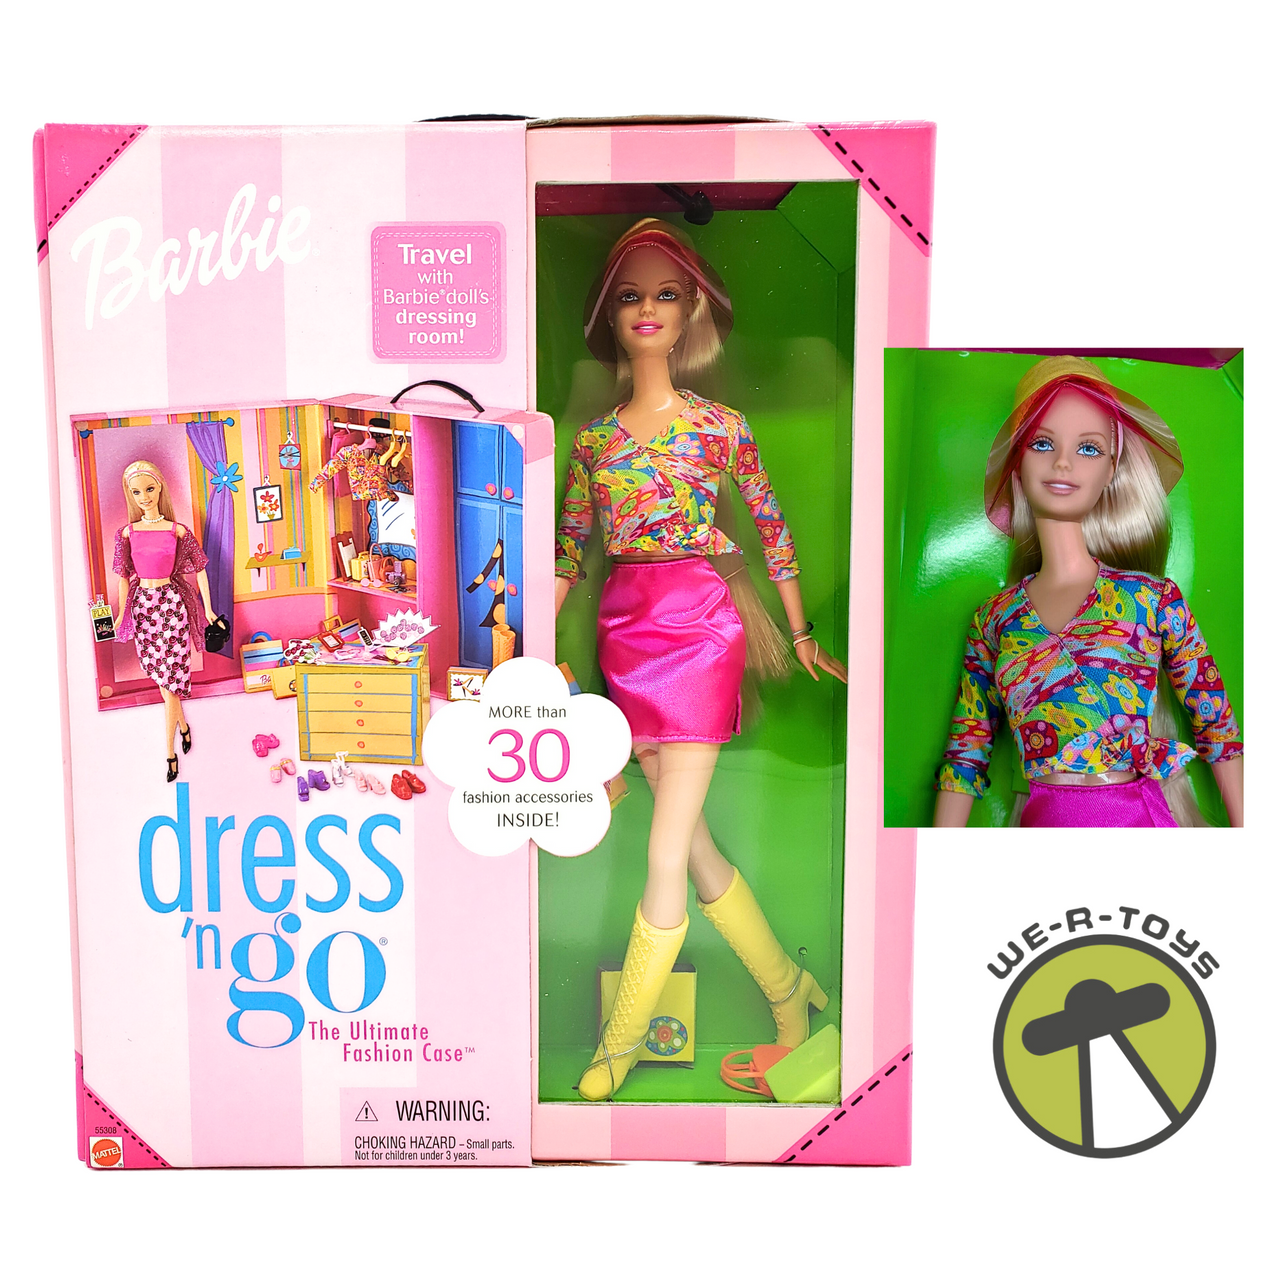 TEMSON Barbie Doll Pretend Play Fashion Set with Handbag, Hat, Shoes,  Suitcase, Dresses and jewellery Dress Change Doll Set Toy For Kids - Barbie  Doll Pretend Play Fashion Set with Handbag, Hat